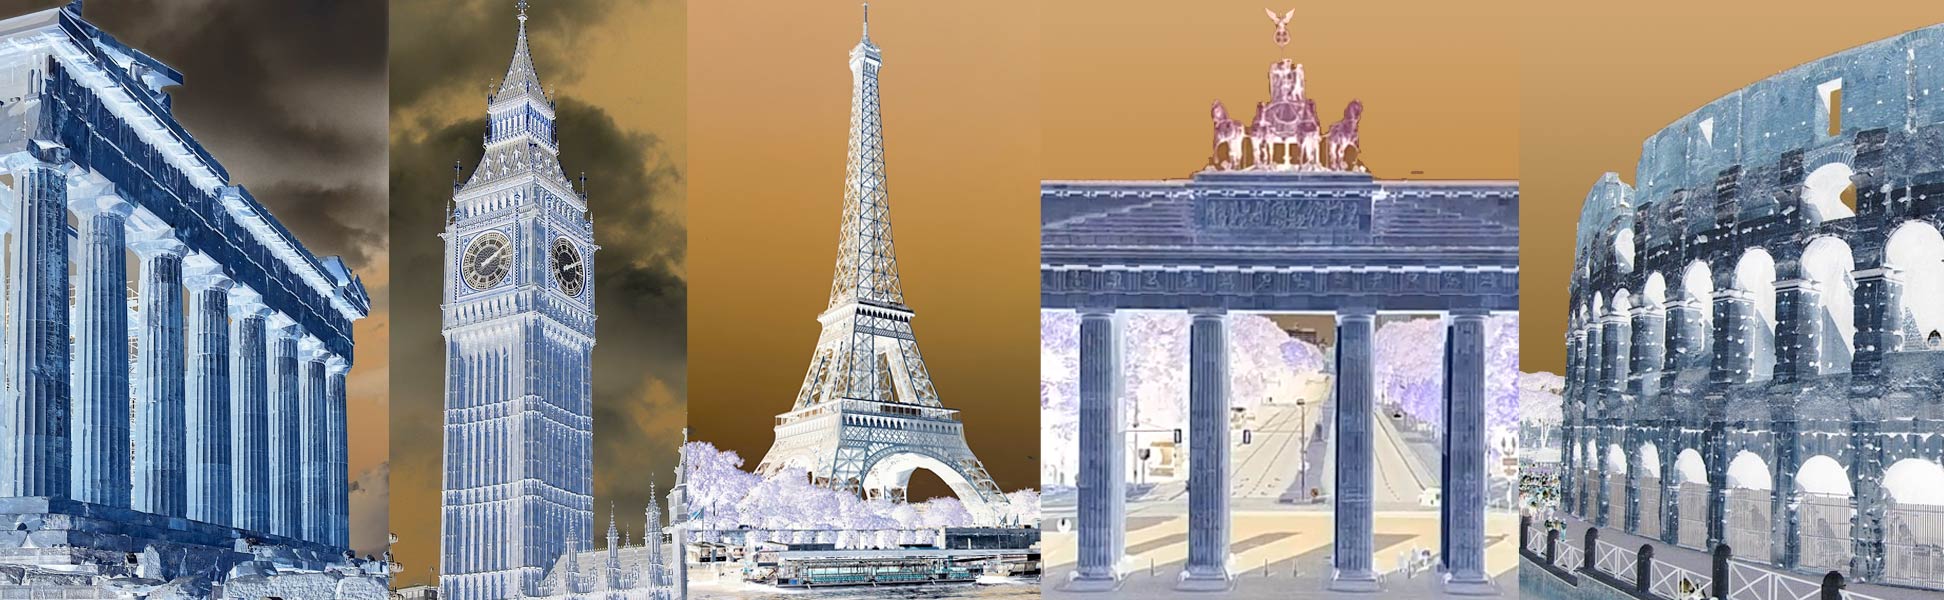 Buildings of European Capitals: Athens, Greece; London, UK; Paris, France; Berlin, Germany; and Rome in Italy